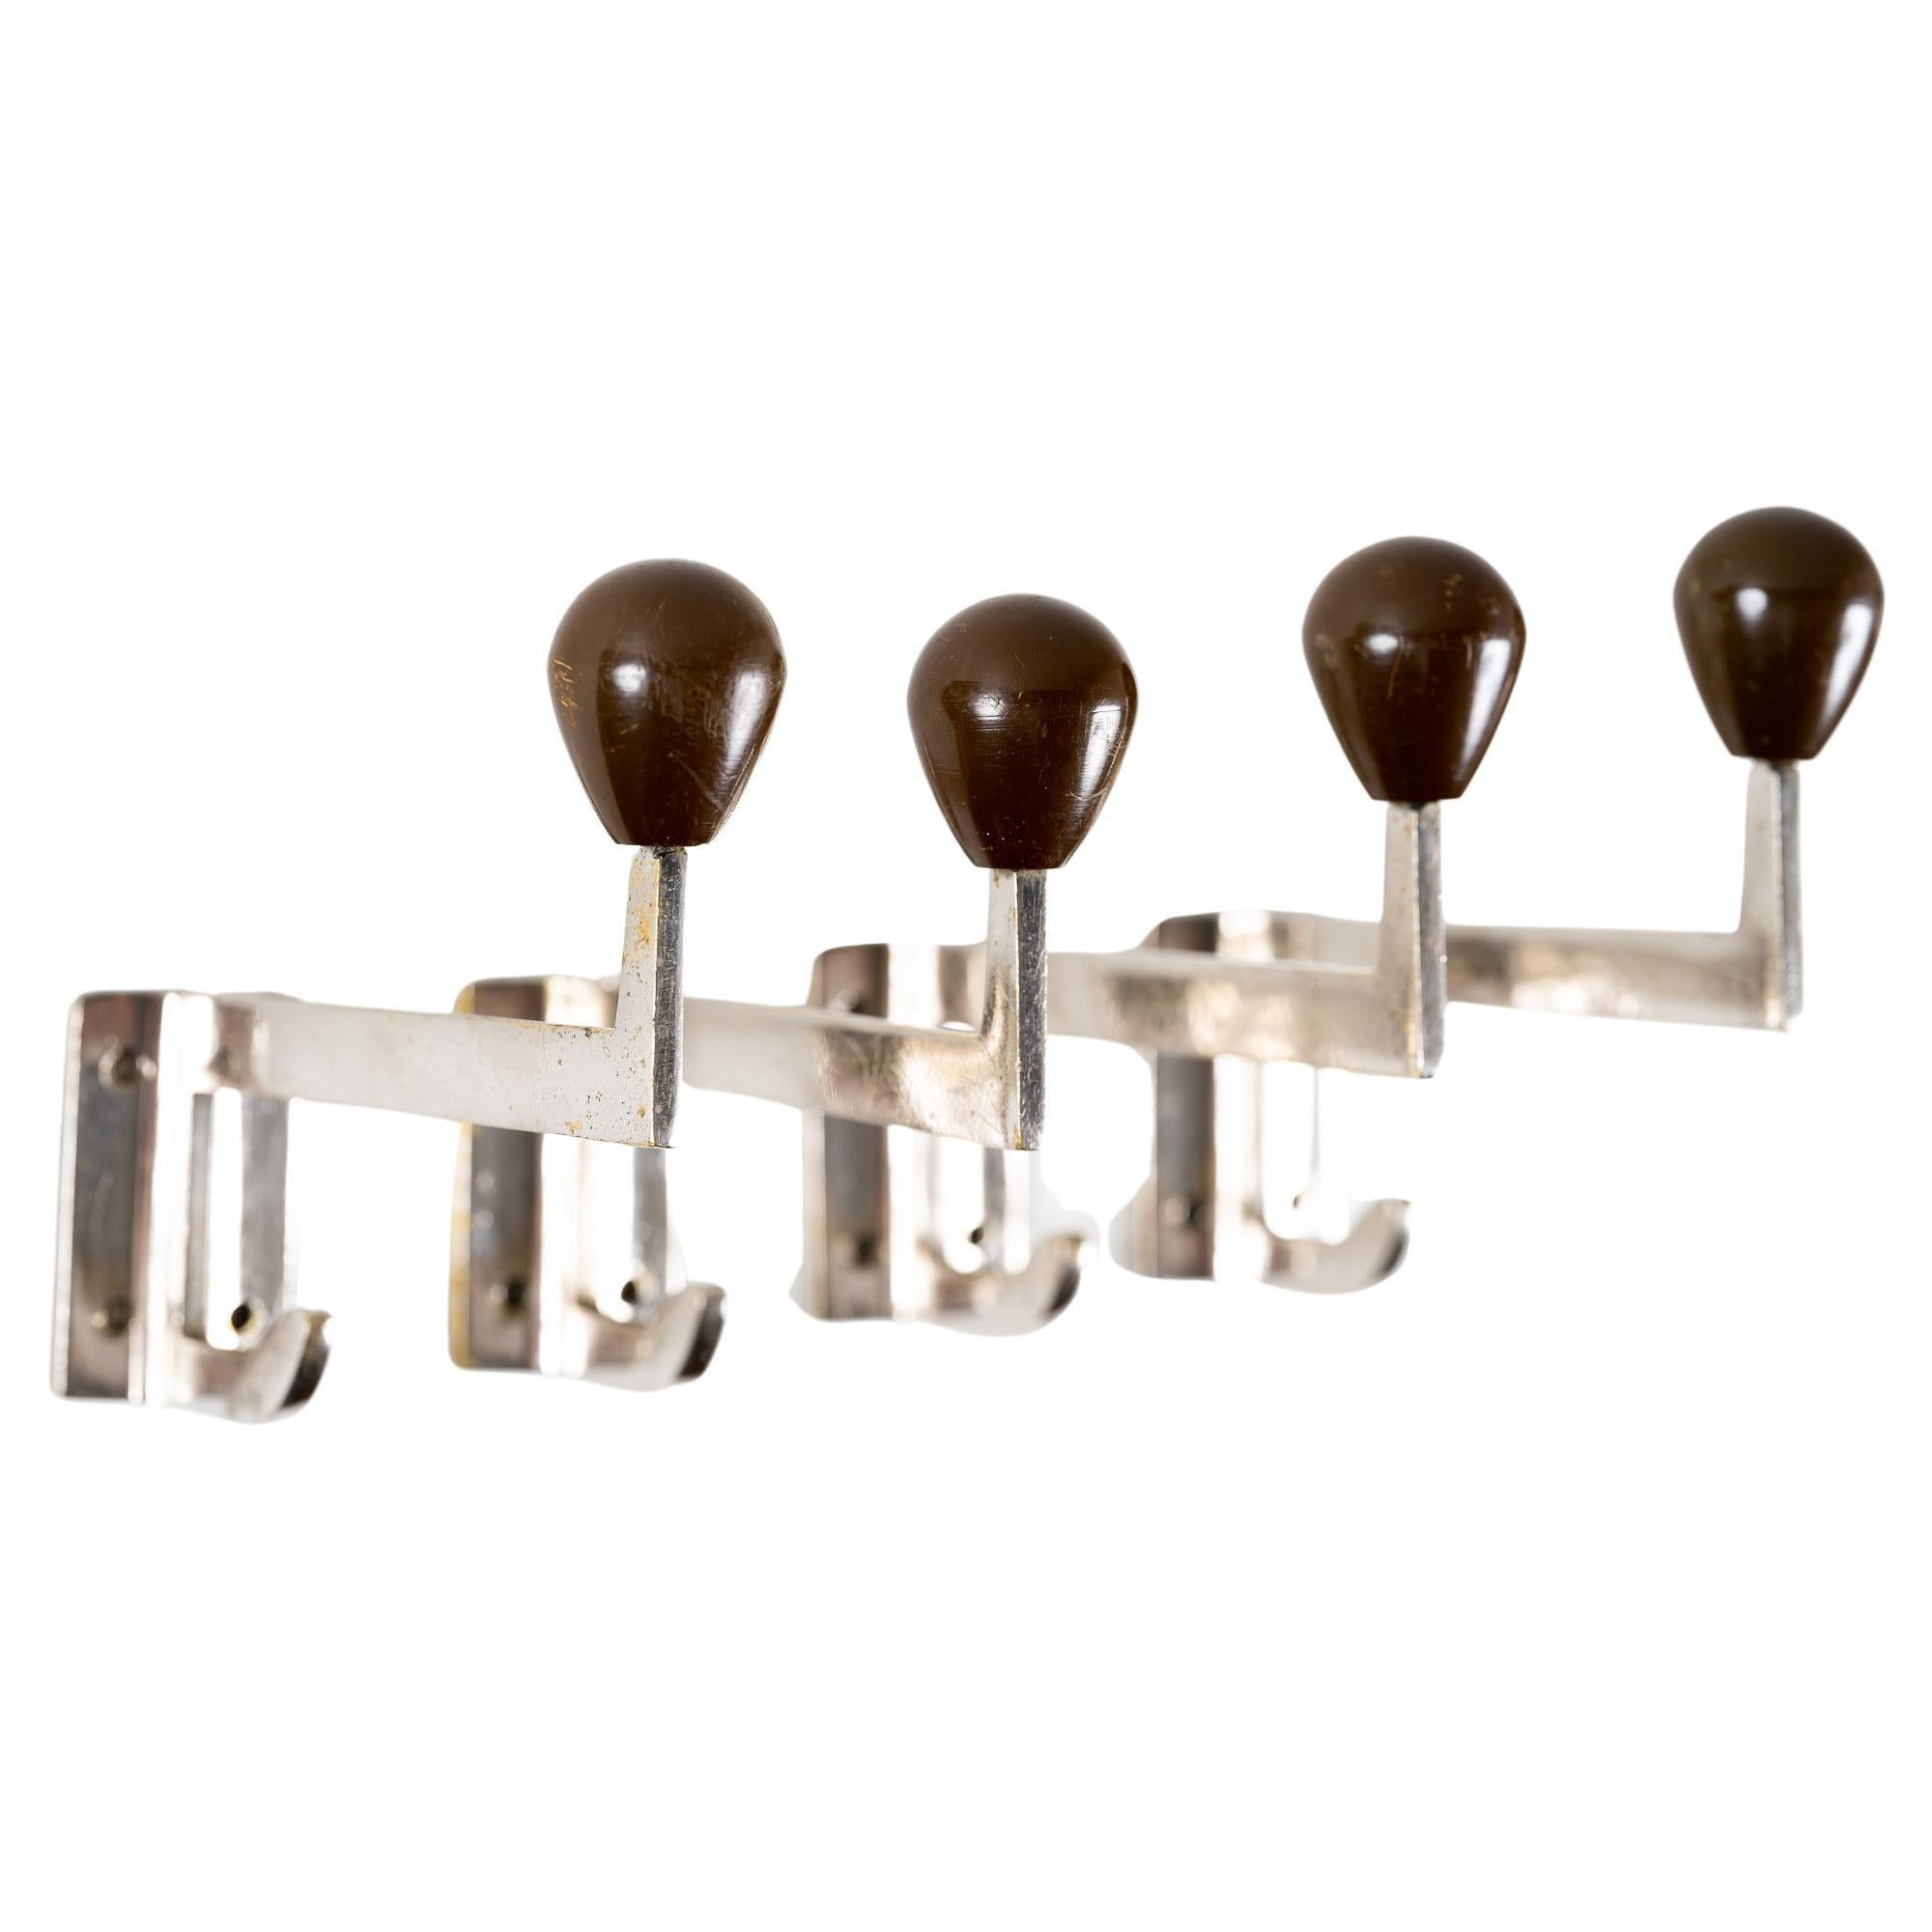 4 Art Deco Nickel-Plated Wall Hooks with Wooden Ball Around 1920